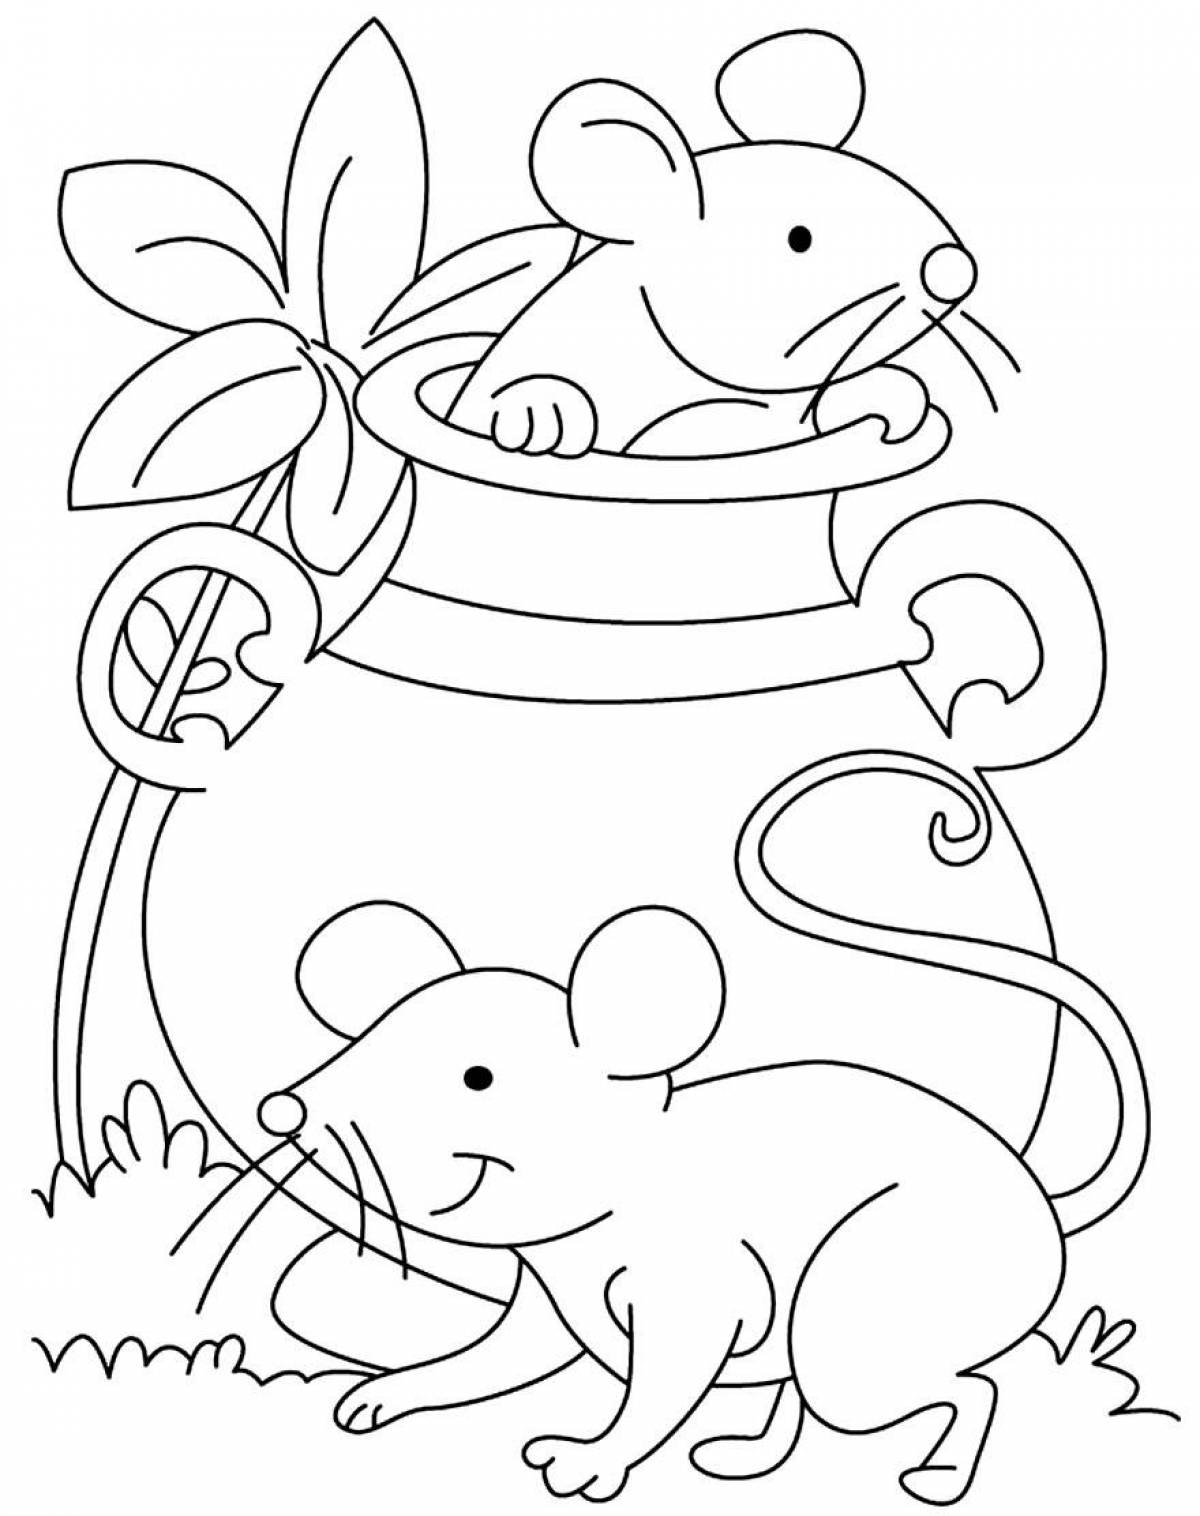 Exquisite mouse coloring book for kids